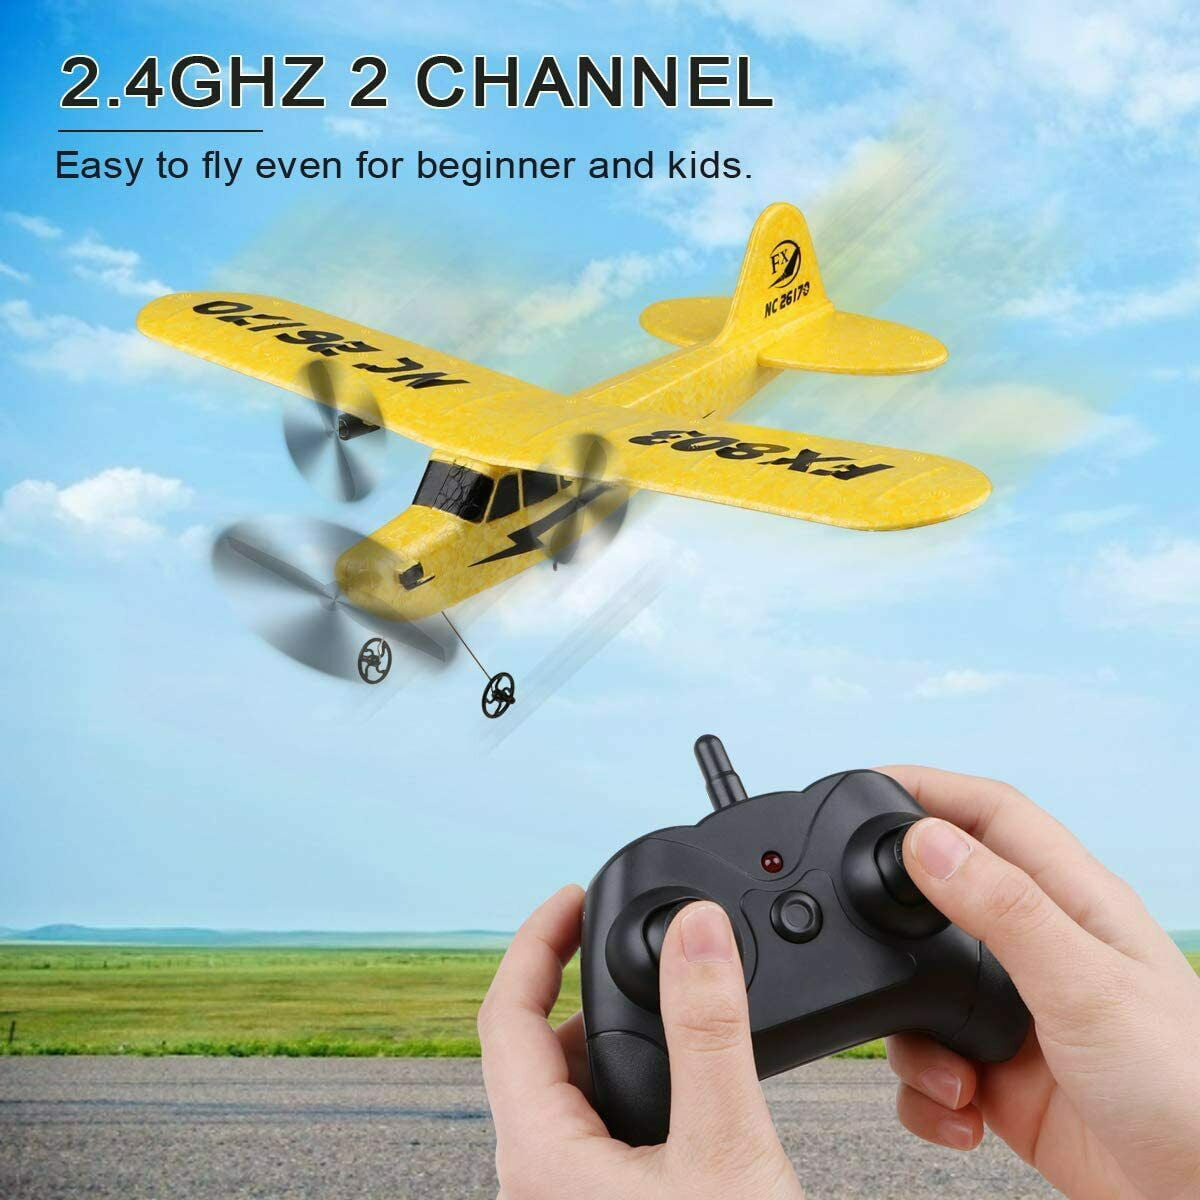 RC Plane Remote Control 2.4GHz 2Channel RC Airplane Built in 6Axis Gyro for Kids